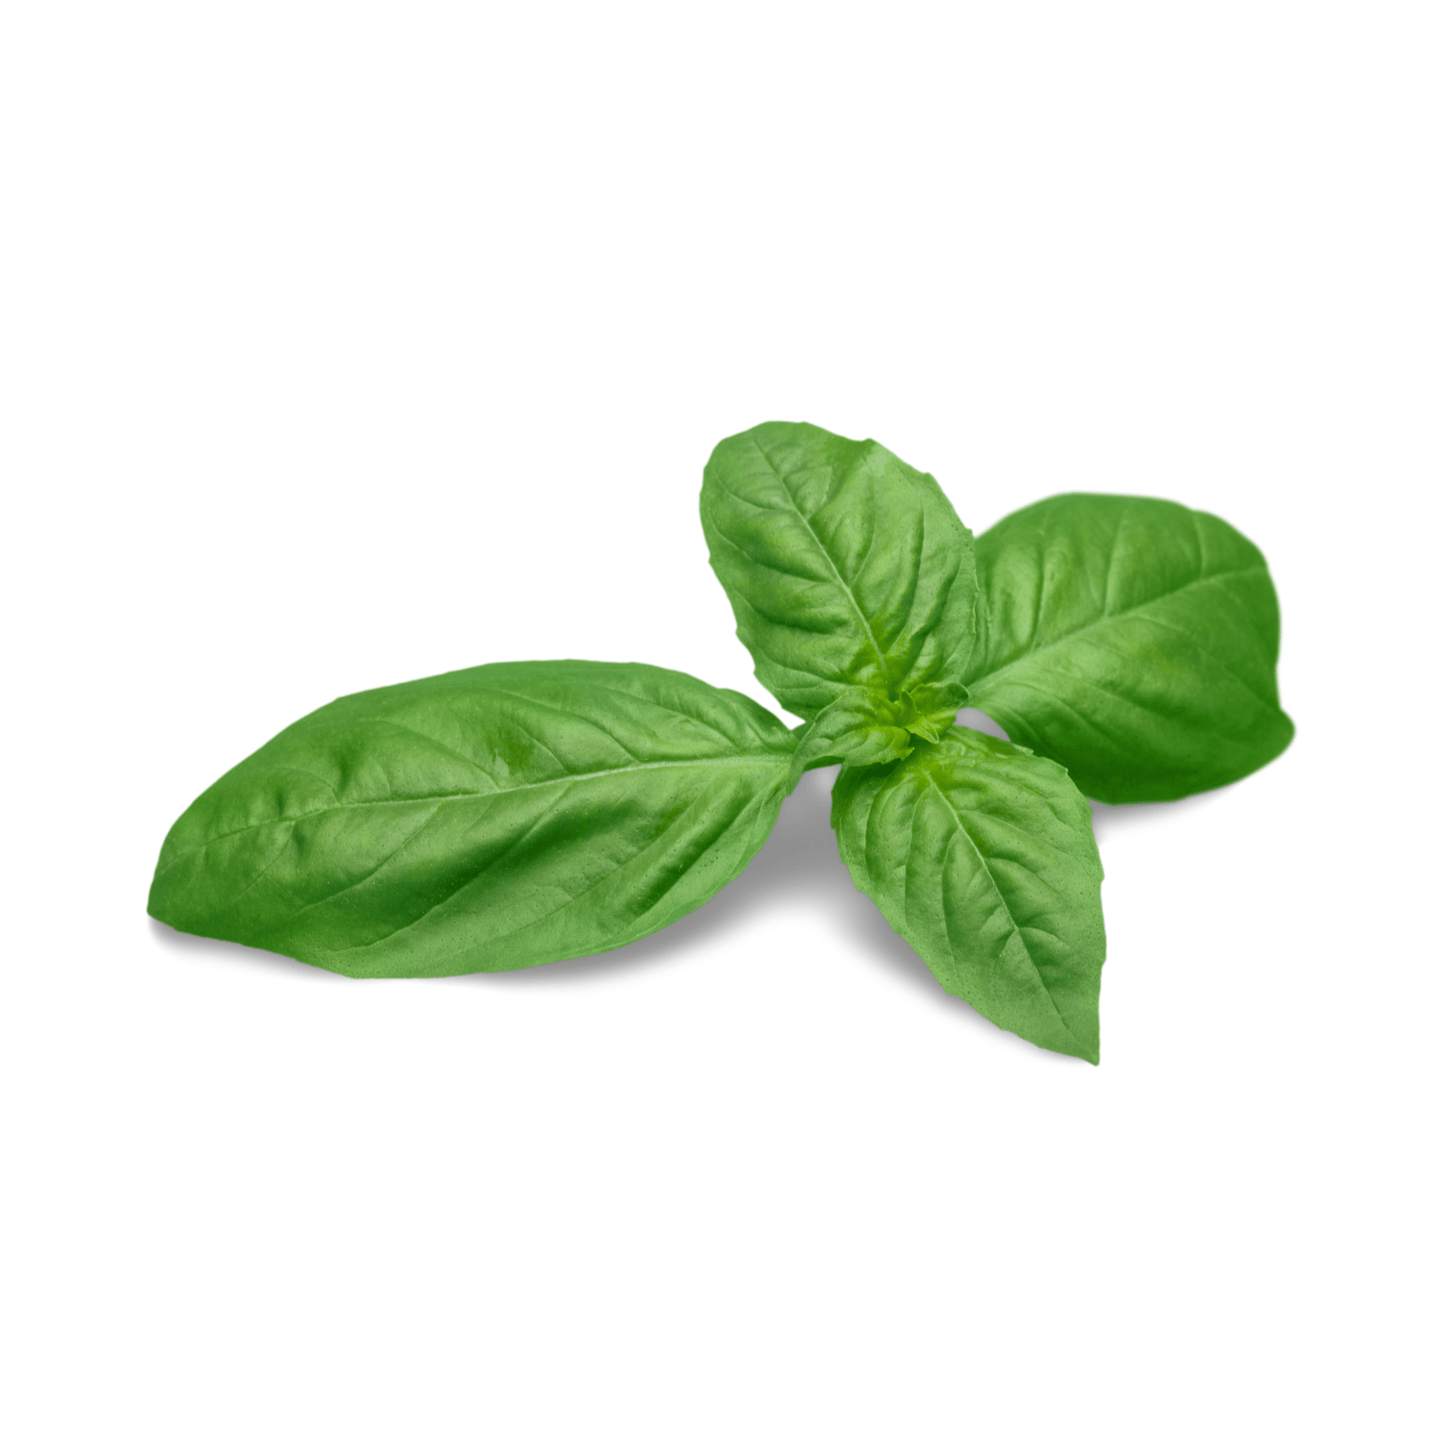 Harvested green basil leaves from basil seeds, available for purchase form Hastyroots.com